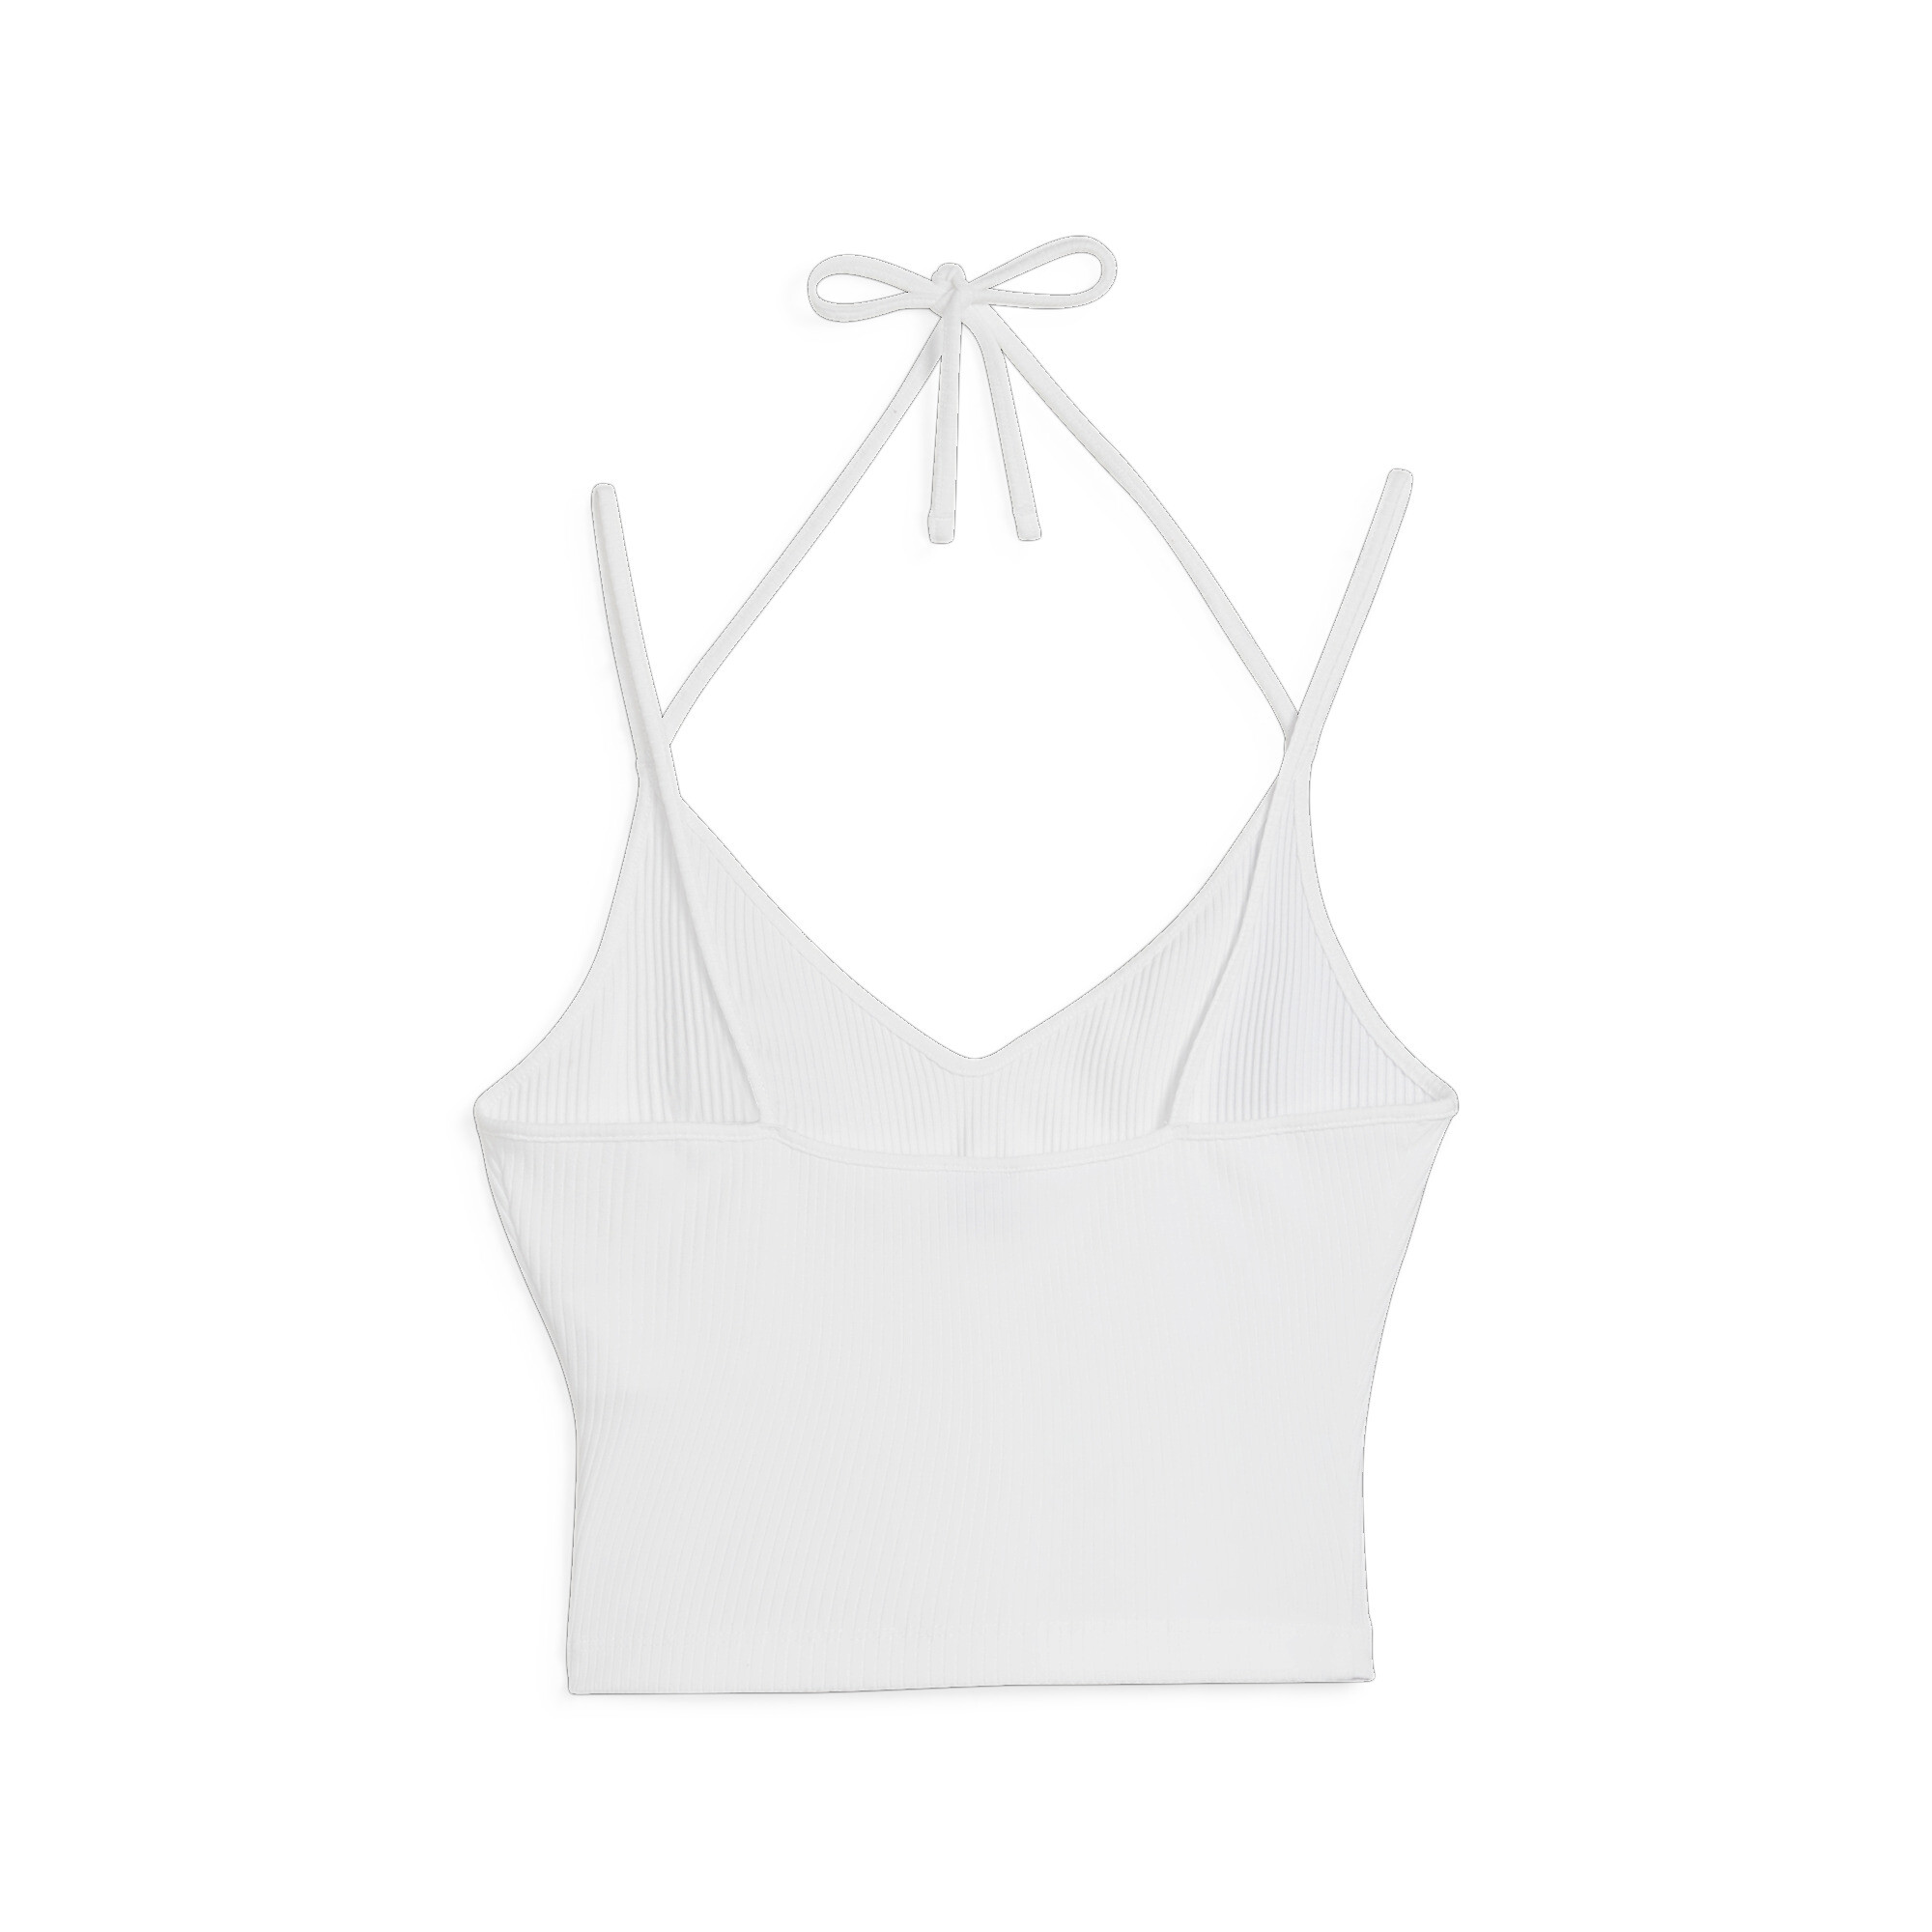 Women's PUMA CLASSICS Ribbed Crop Top In White, Size XL